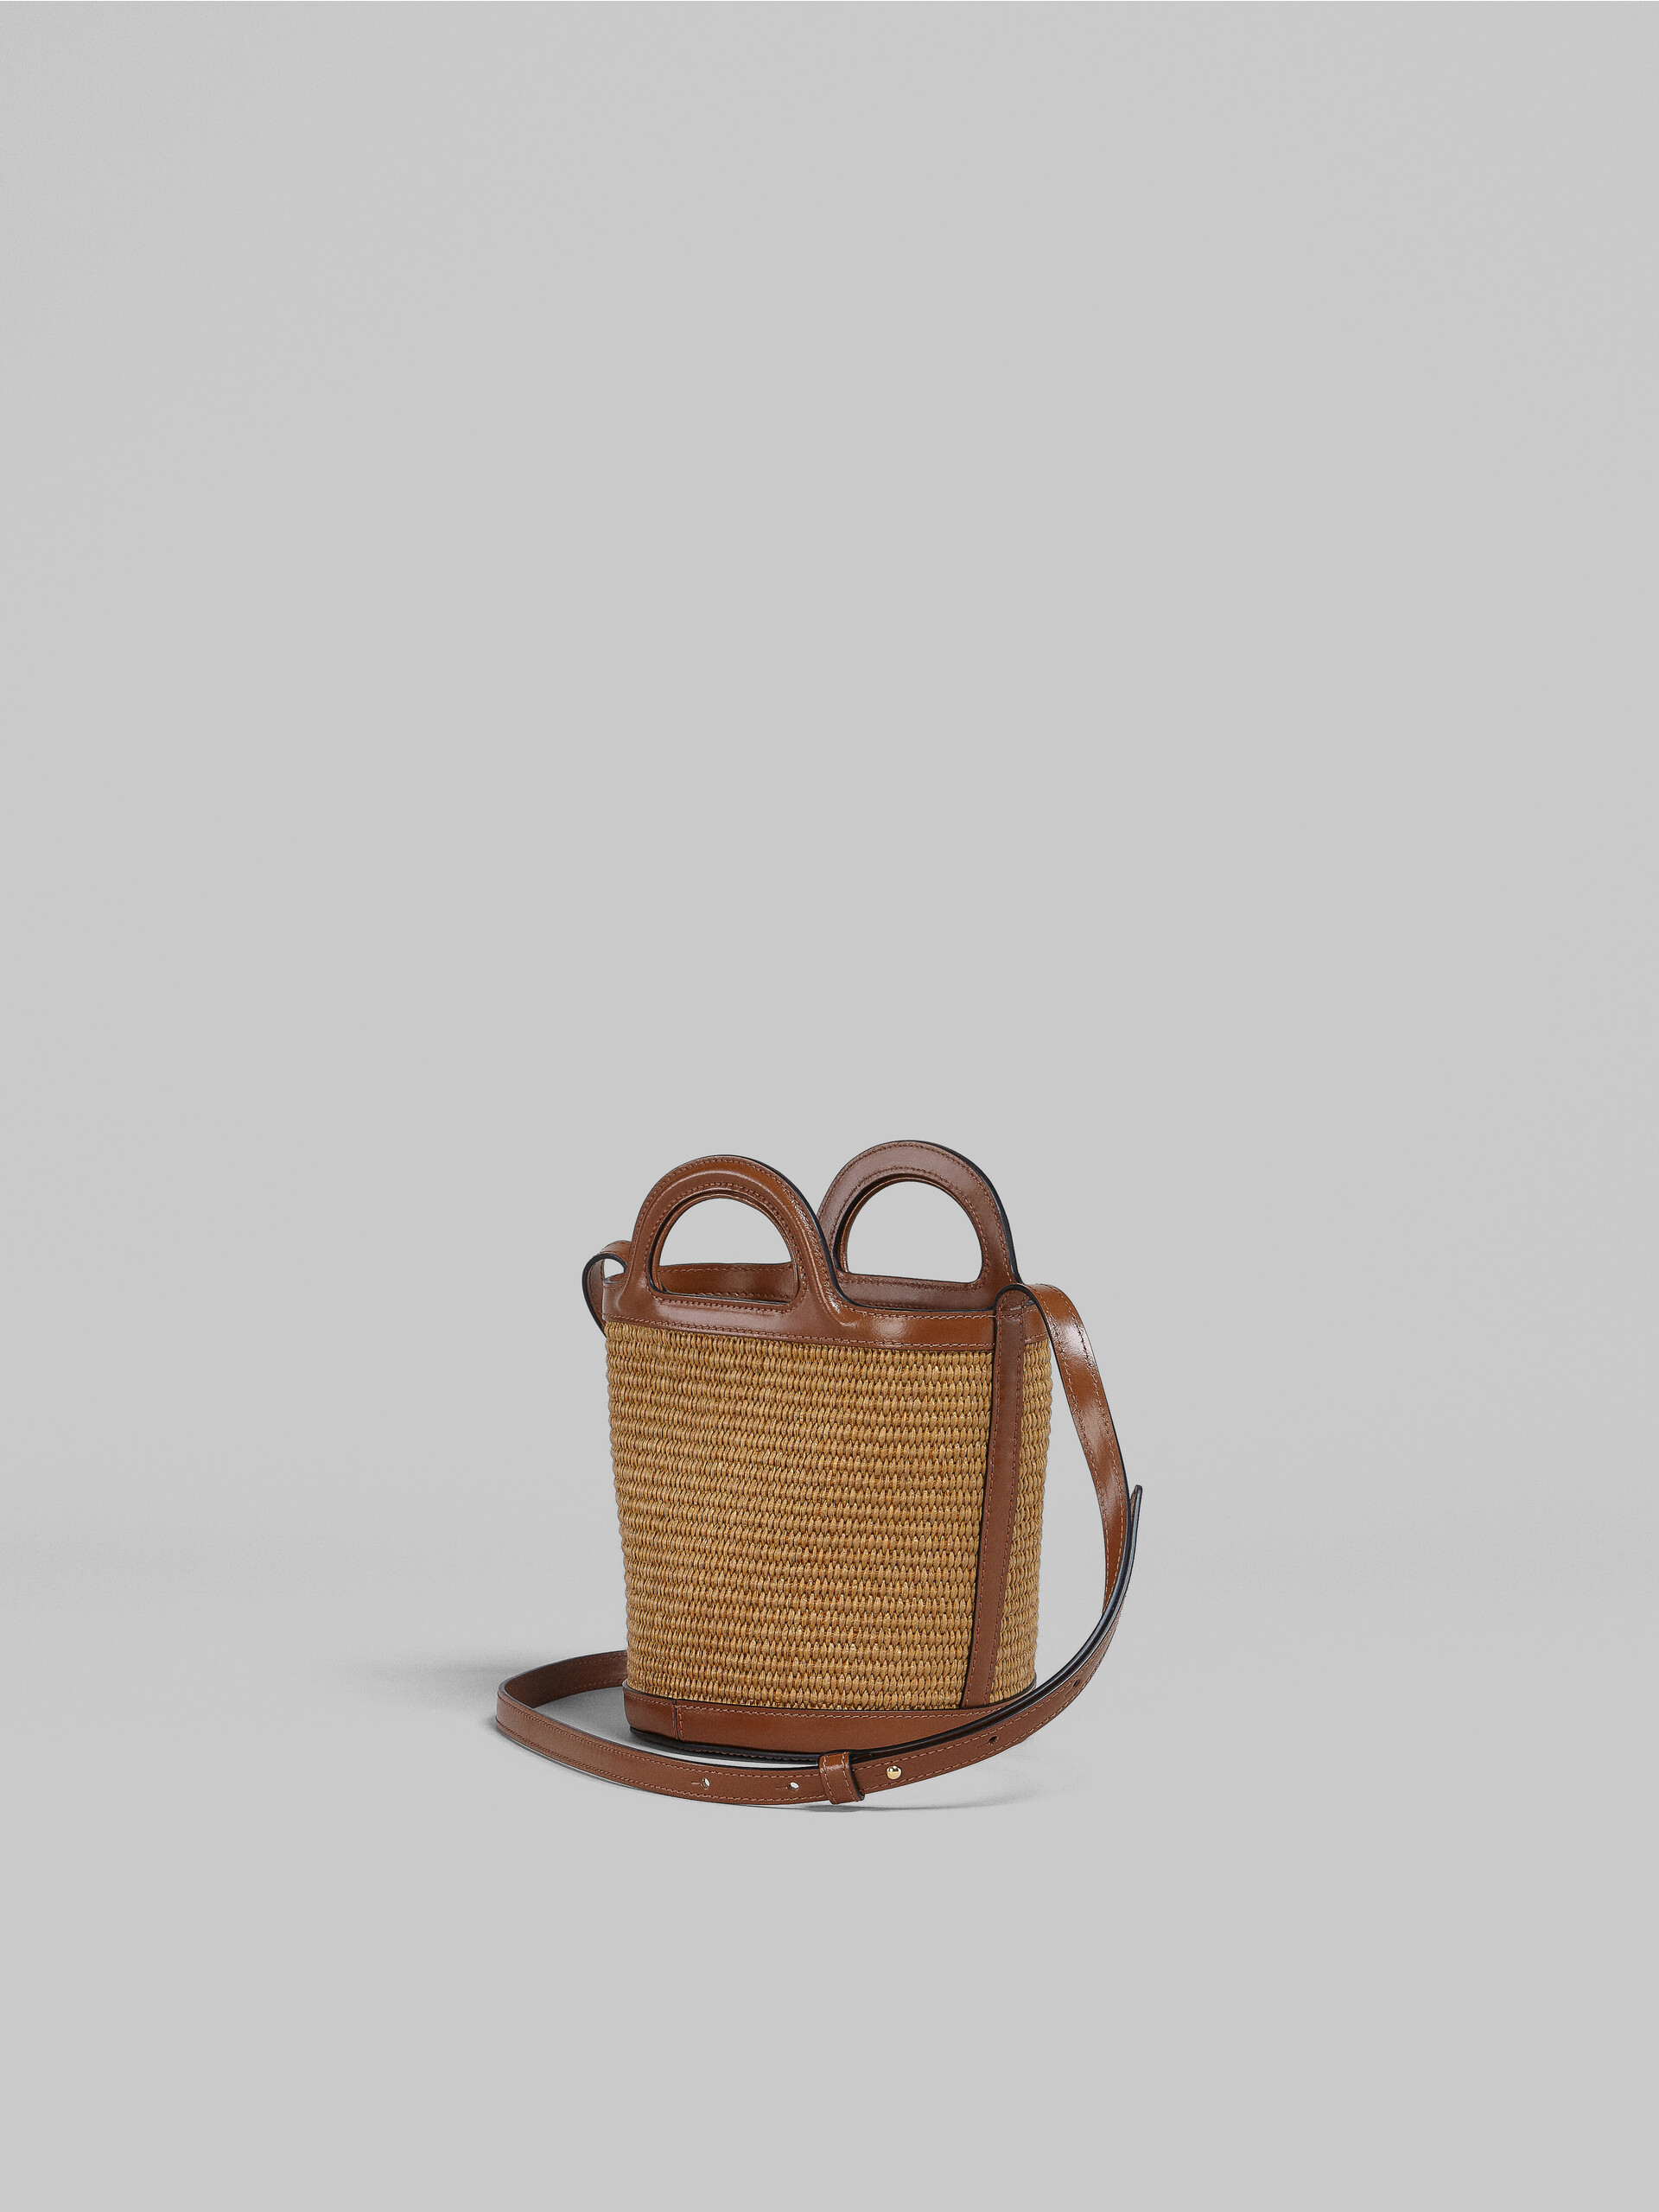 Tropicalia Small Bucket Bag in light blue leather and raffia-effect fabric - Shoulder Bags - Image 3